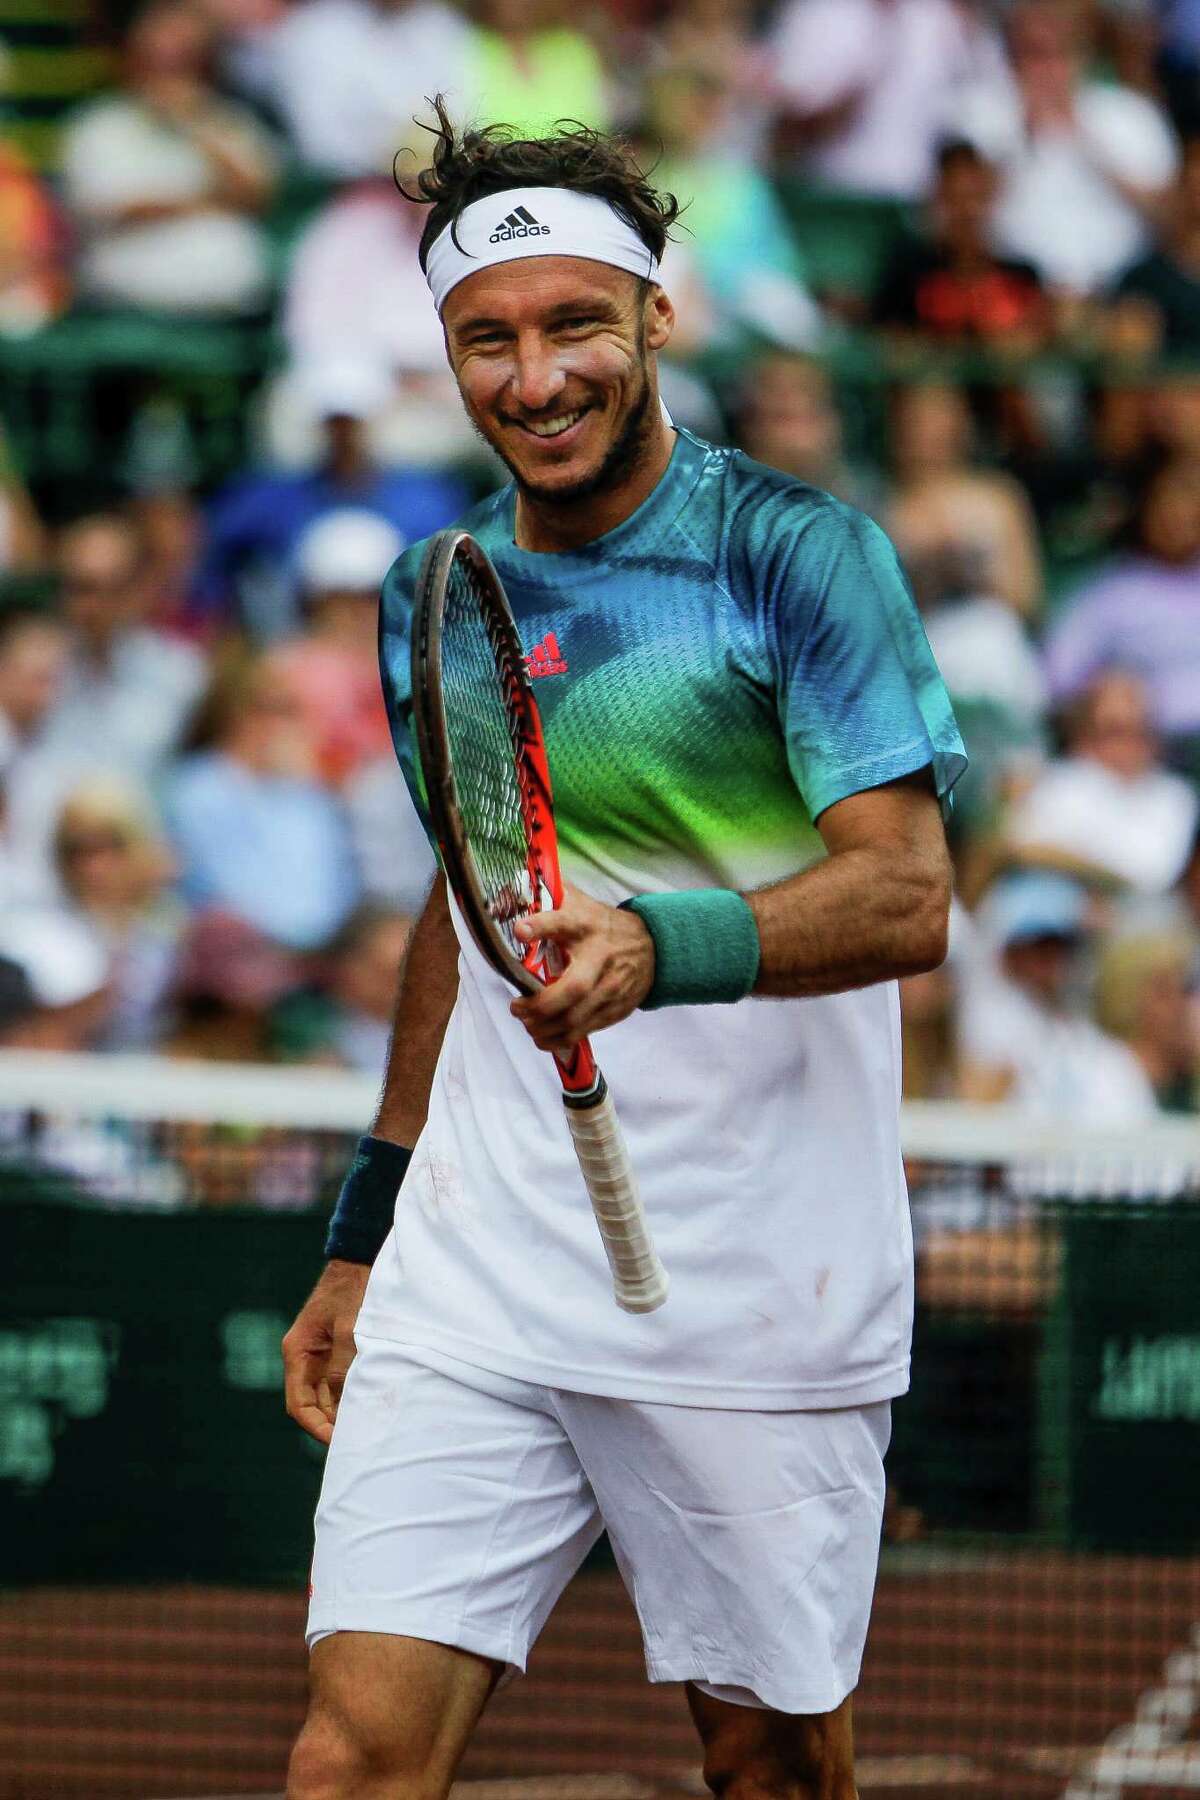 While Juan Monaco, left, was fired up at winning his second title in Houston, Jack Sock wasn't up to the task of repeating in the event as he struggled through a variety of physical ailments.